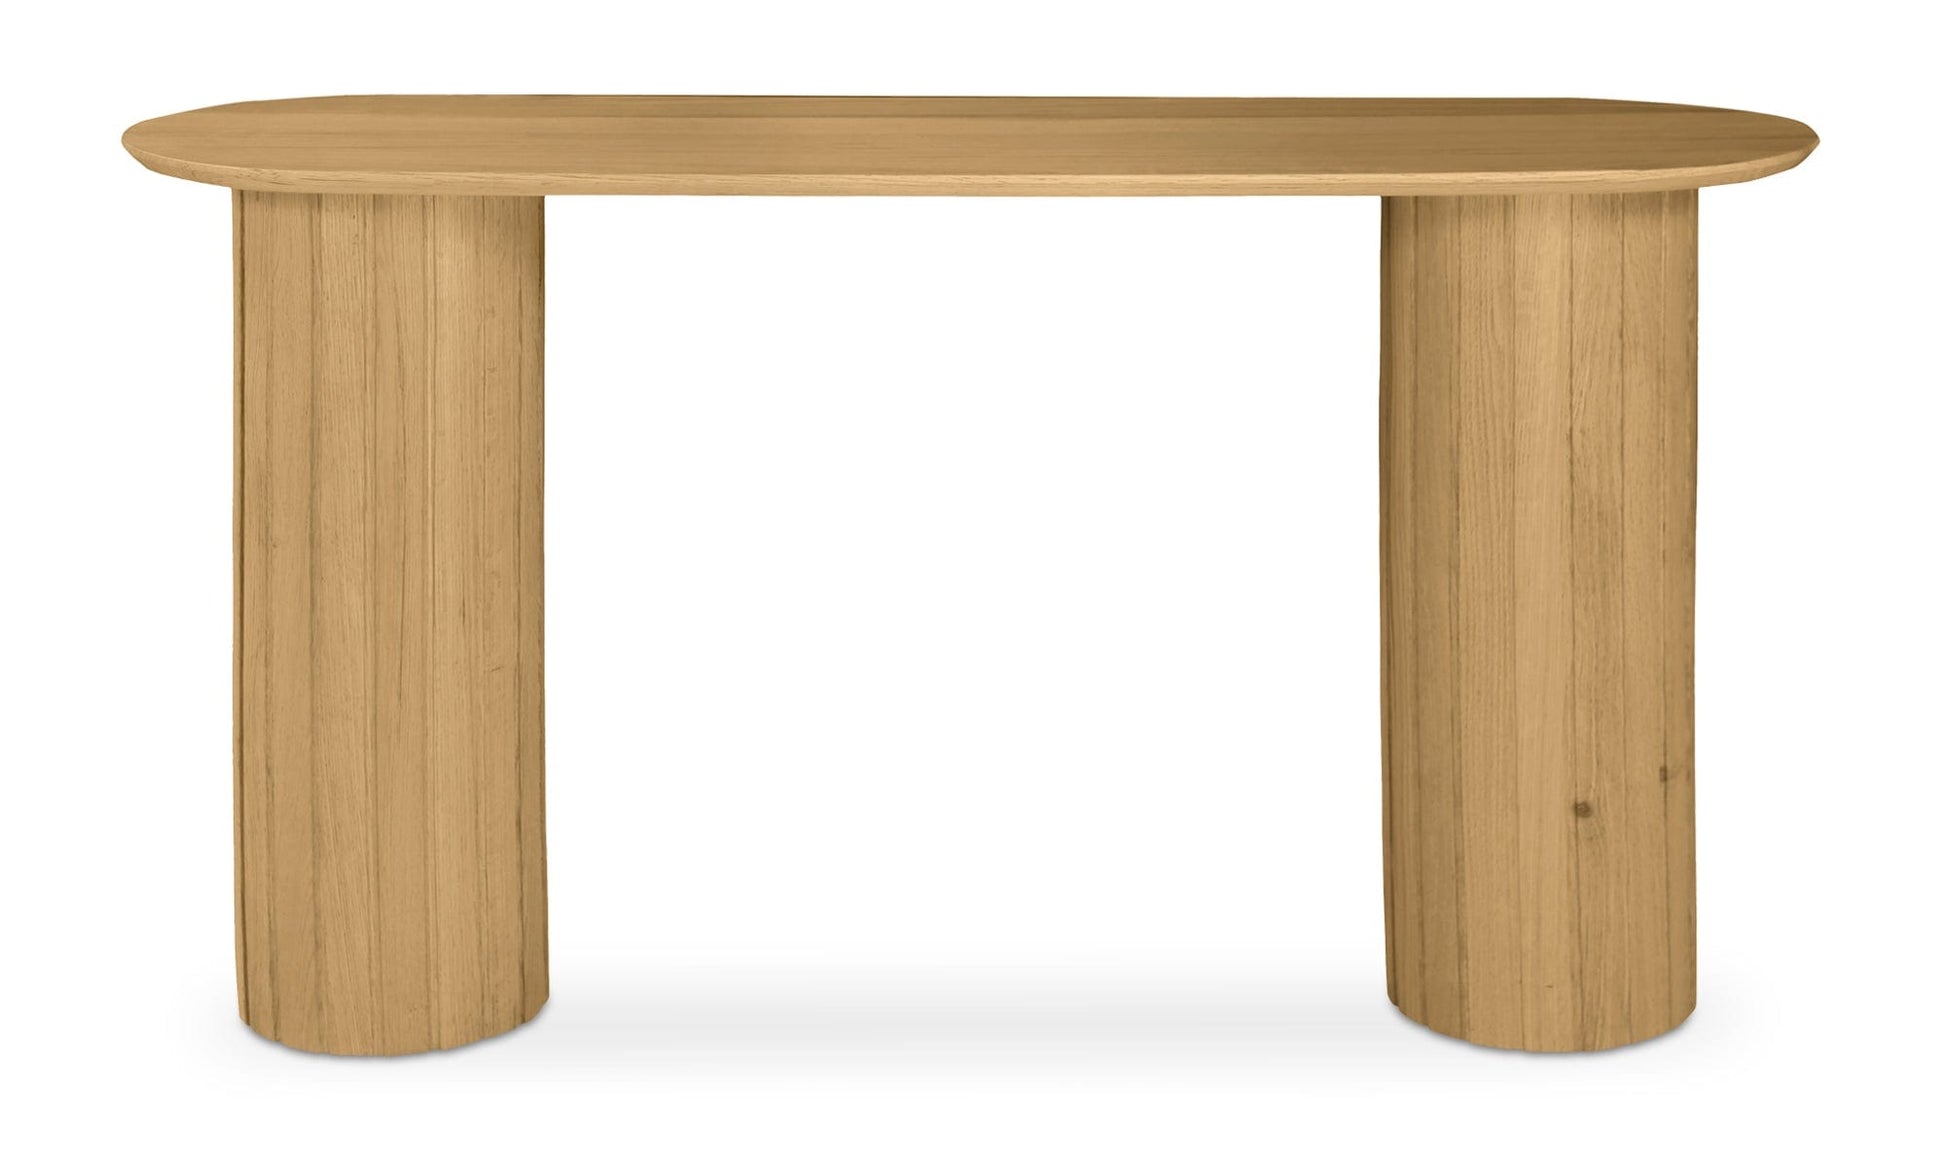 Moe's Carpentry & Woodworking Natural POVERA CONSOLE TABLE